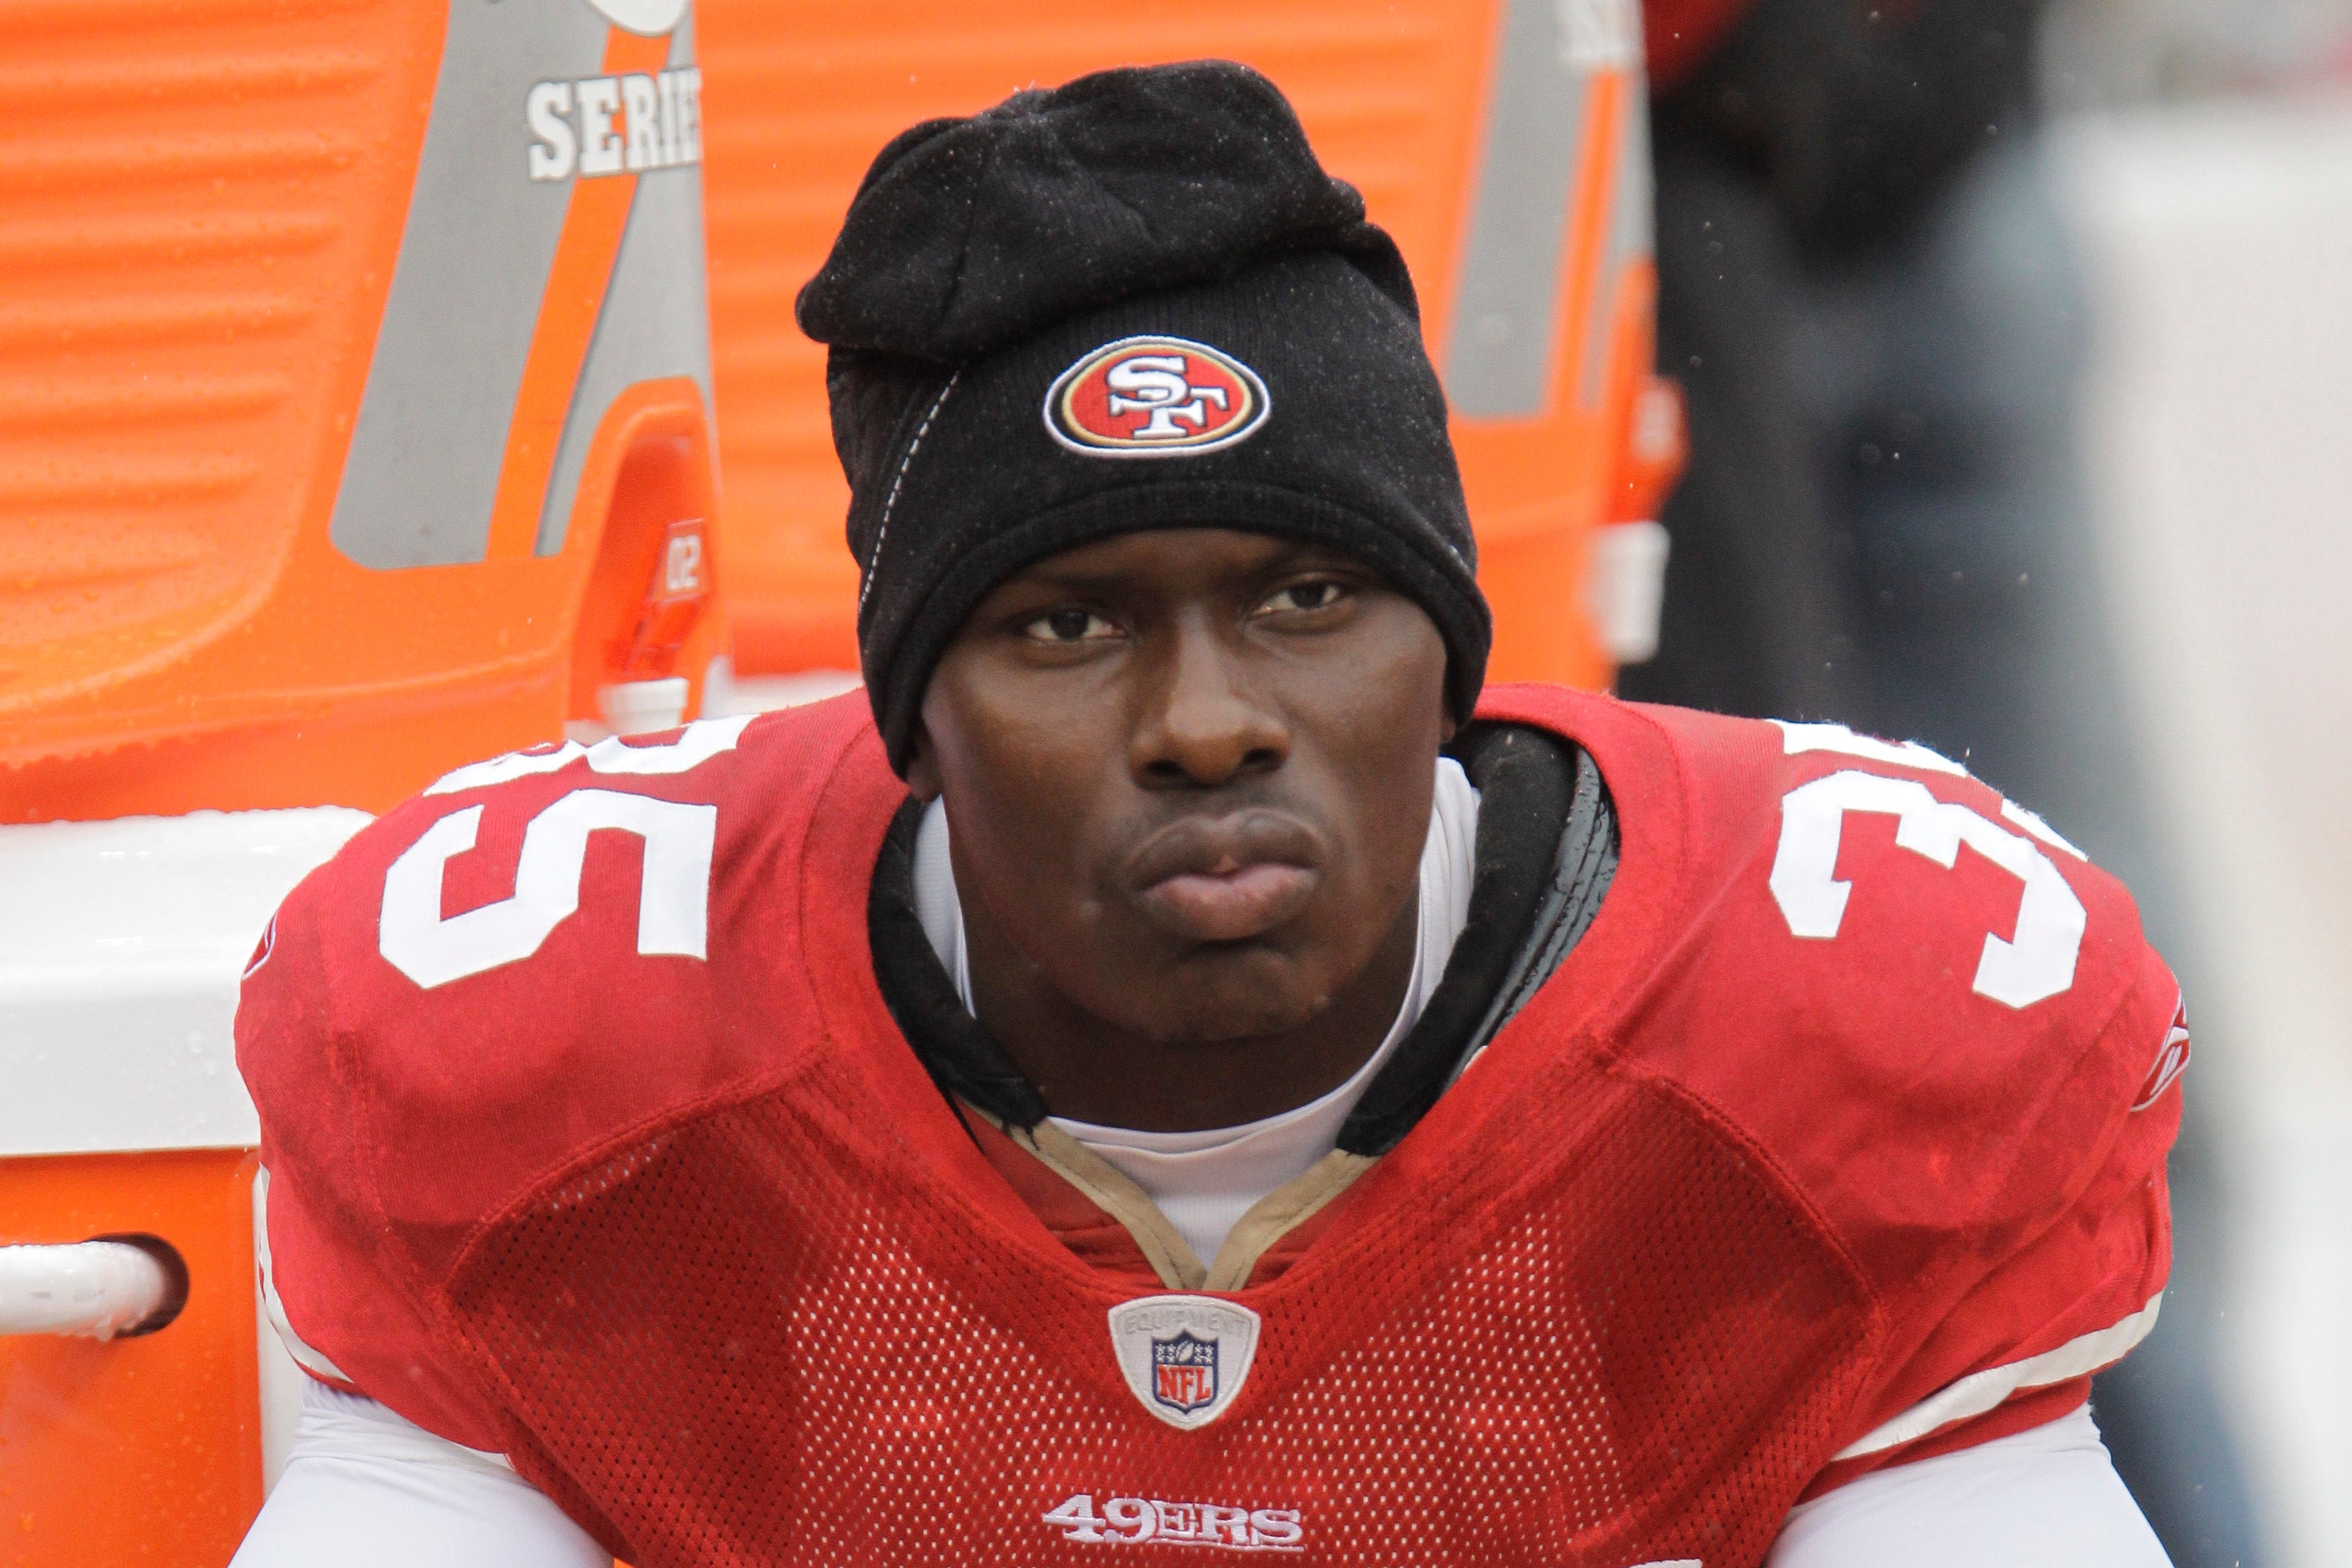 NFL player Phillip Adams is believed to have shot and killed six people before killing himself.